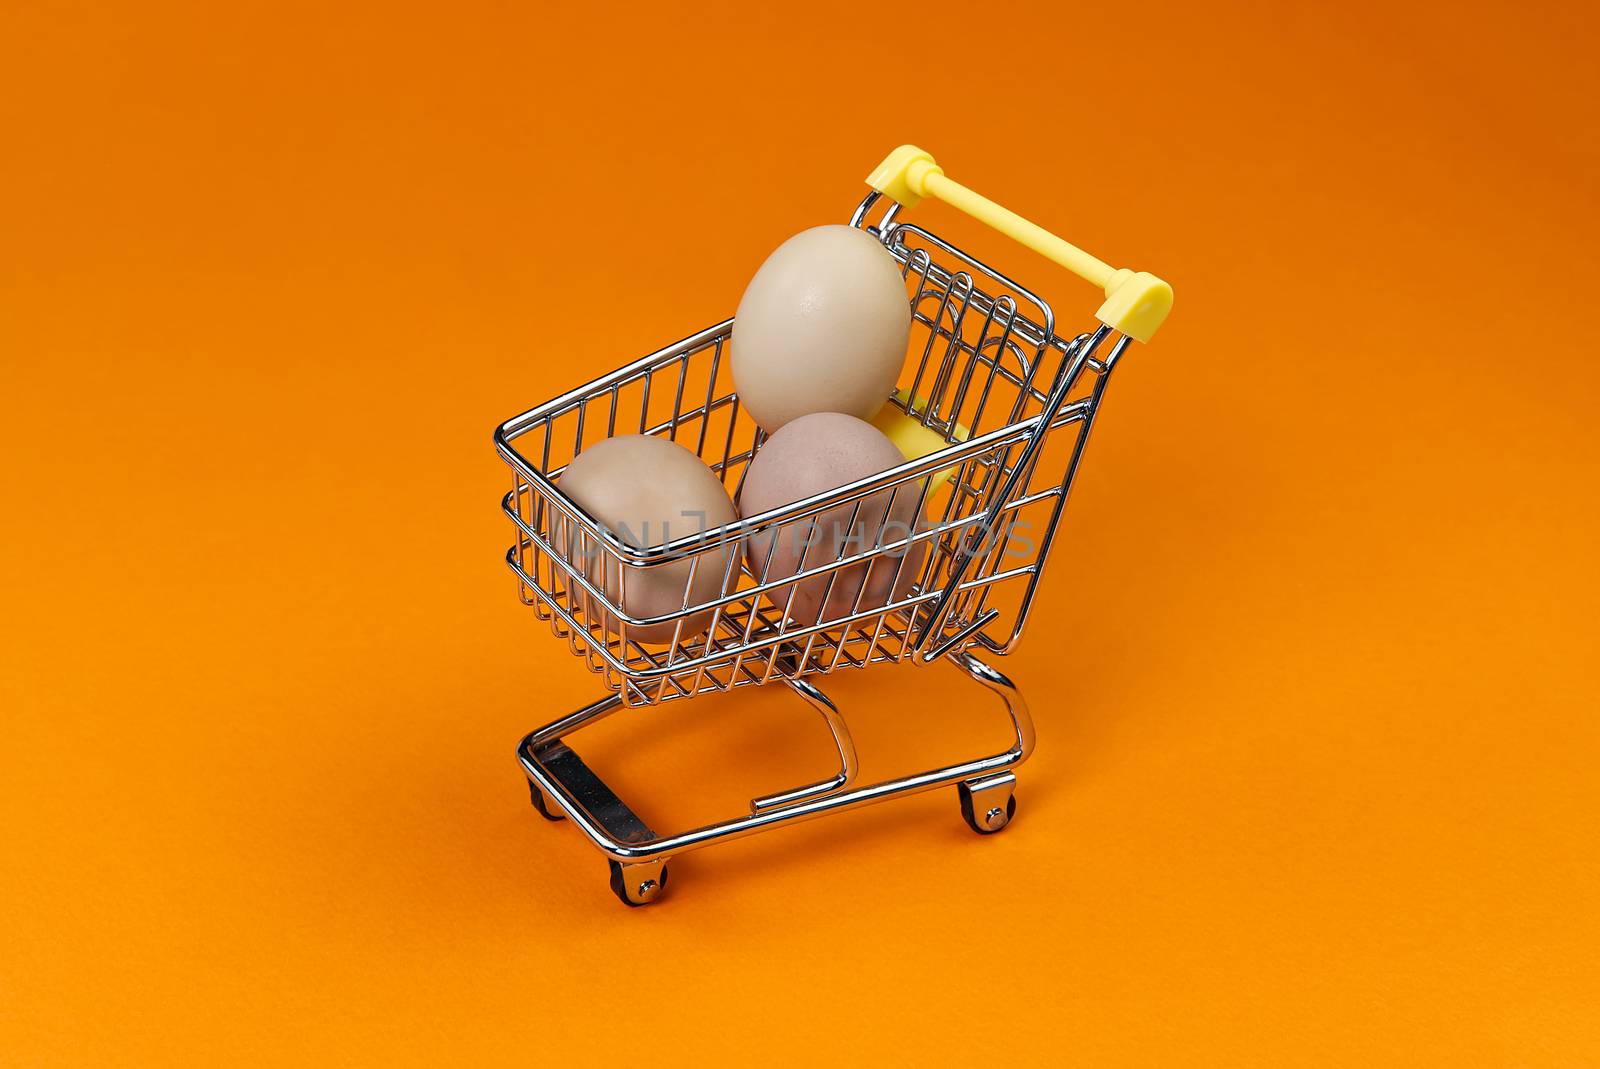 chicken eggs in a shopping cart. isolated on orange.